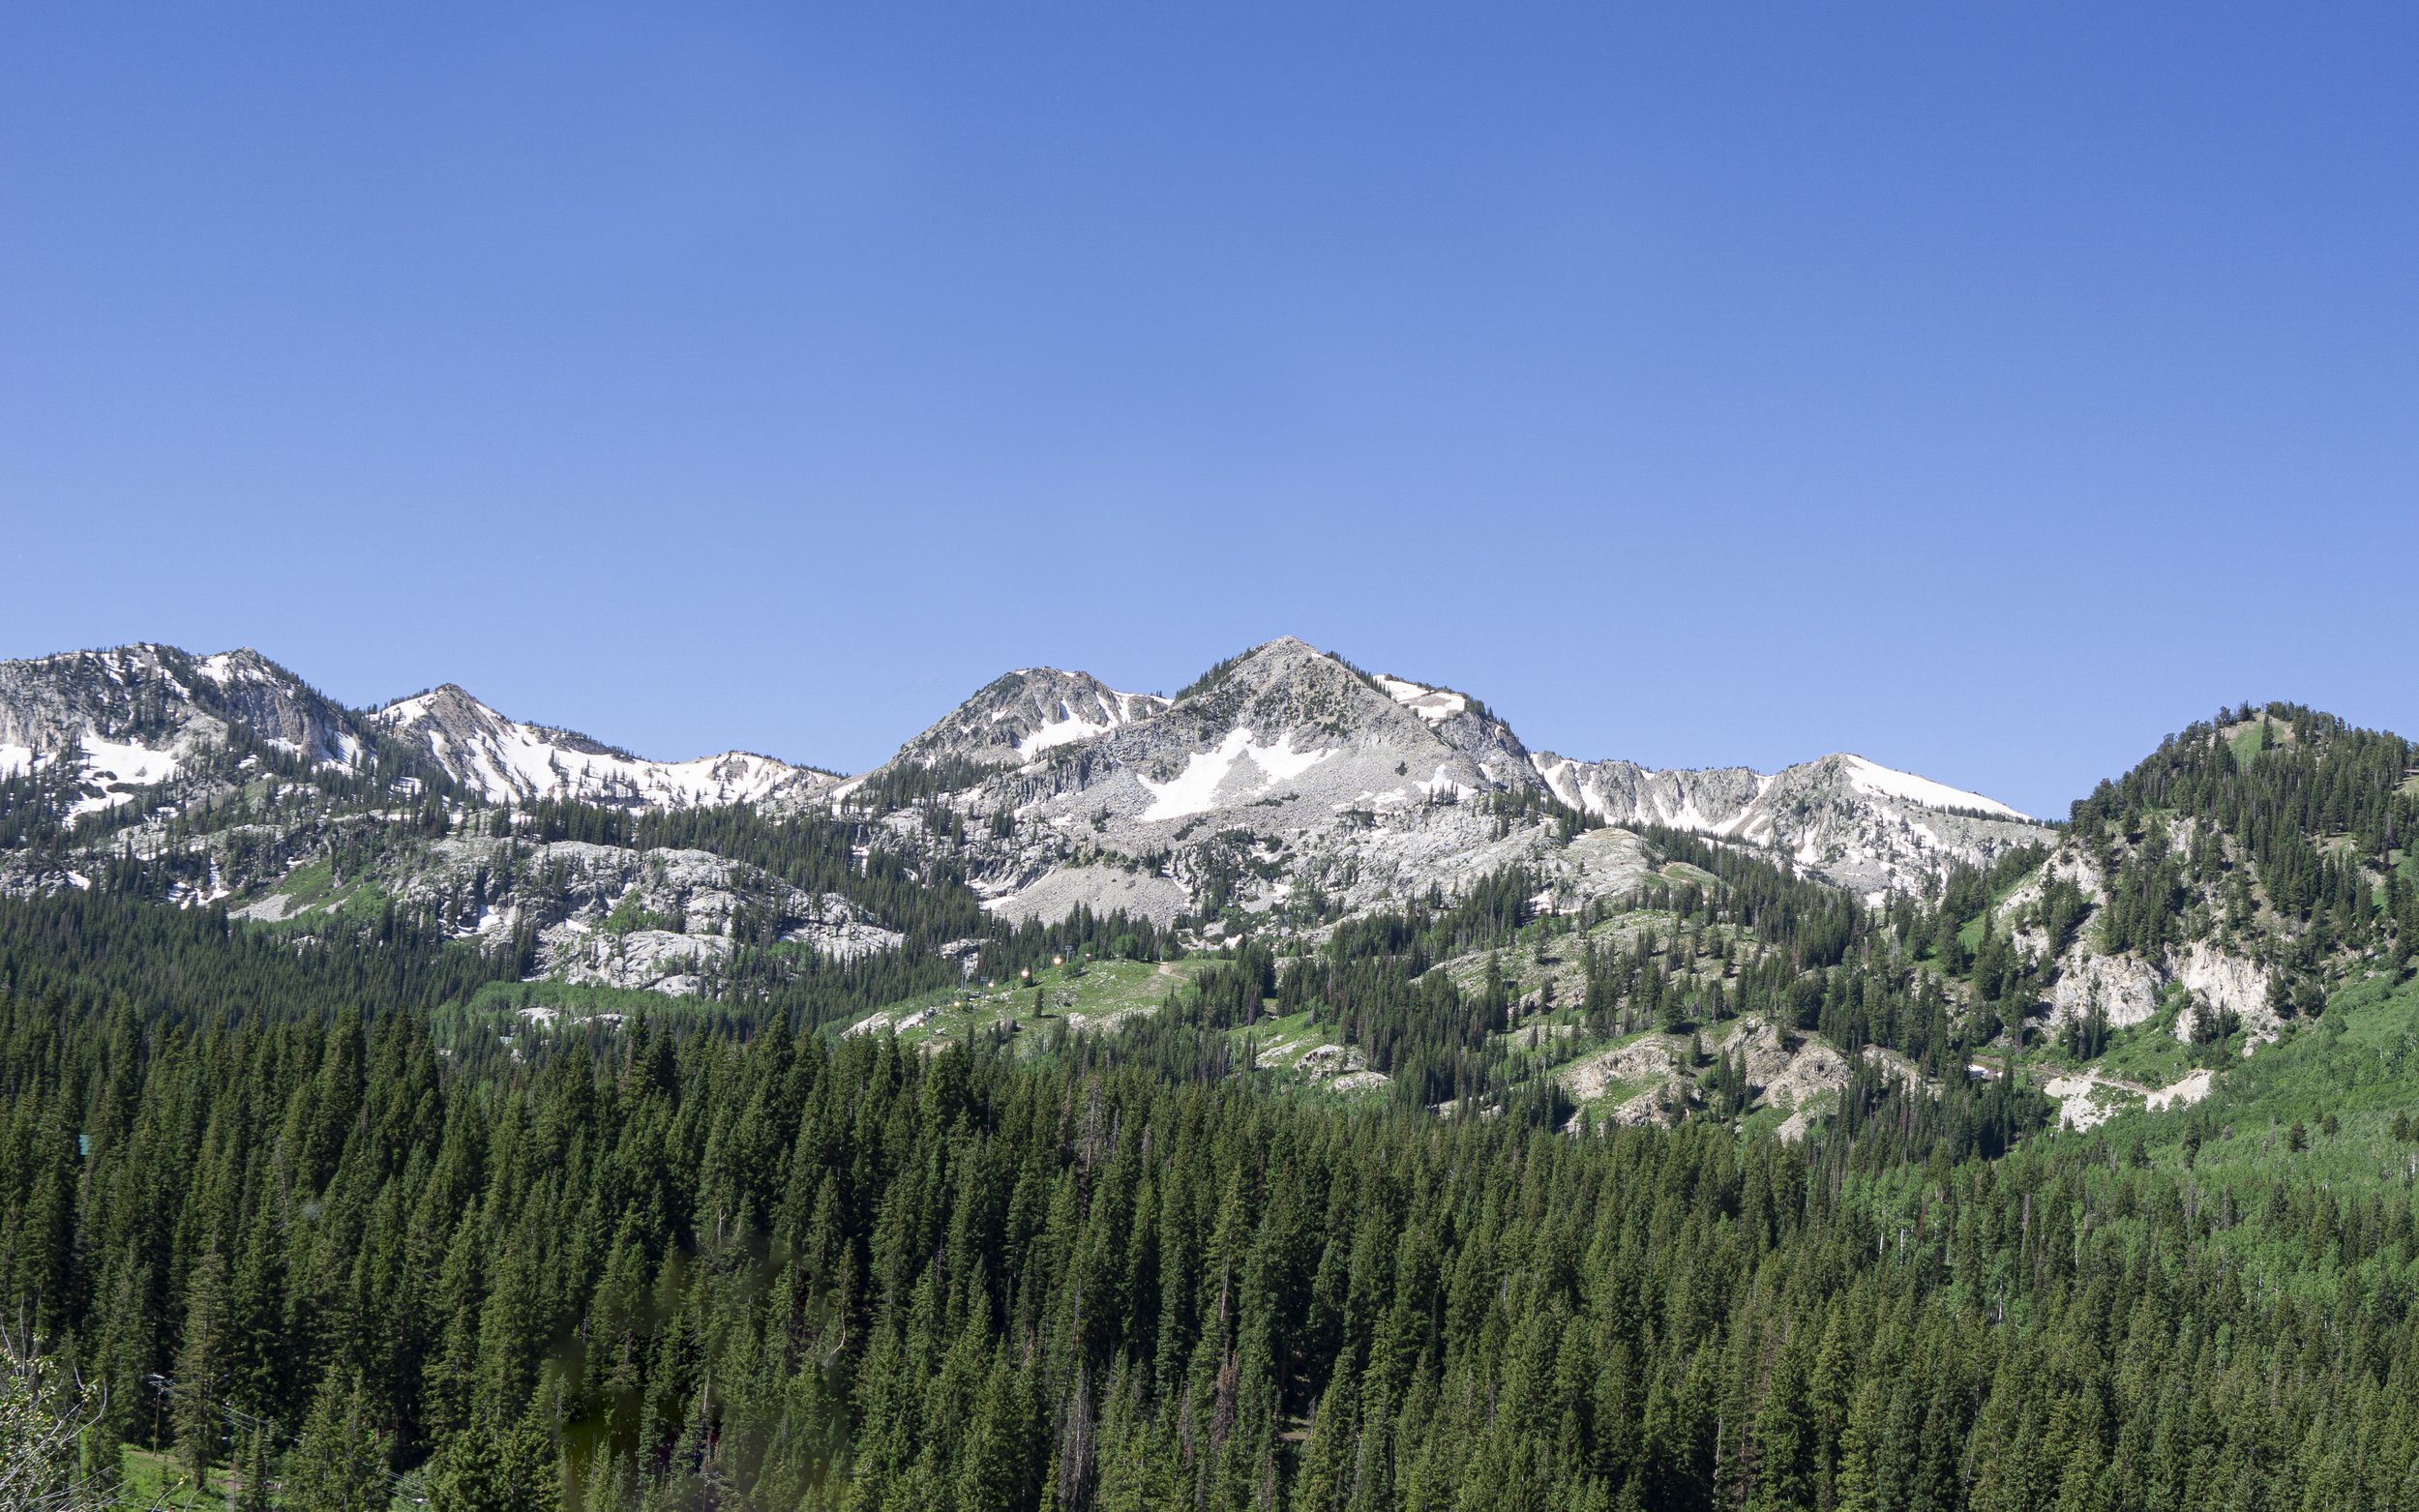 View from Guardsman Pass